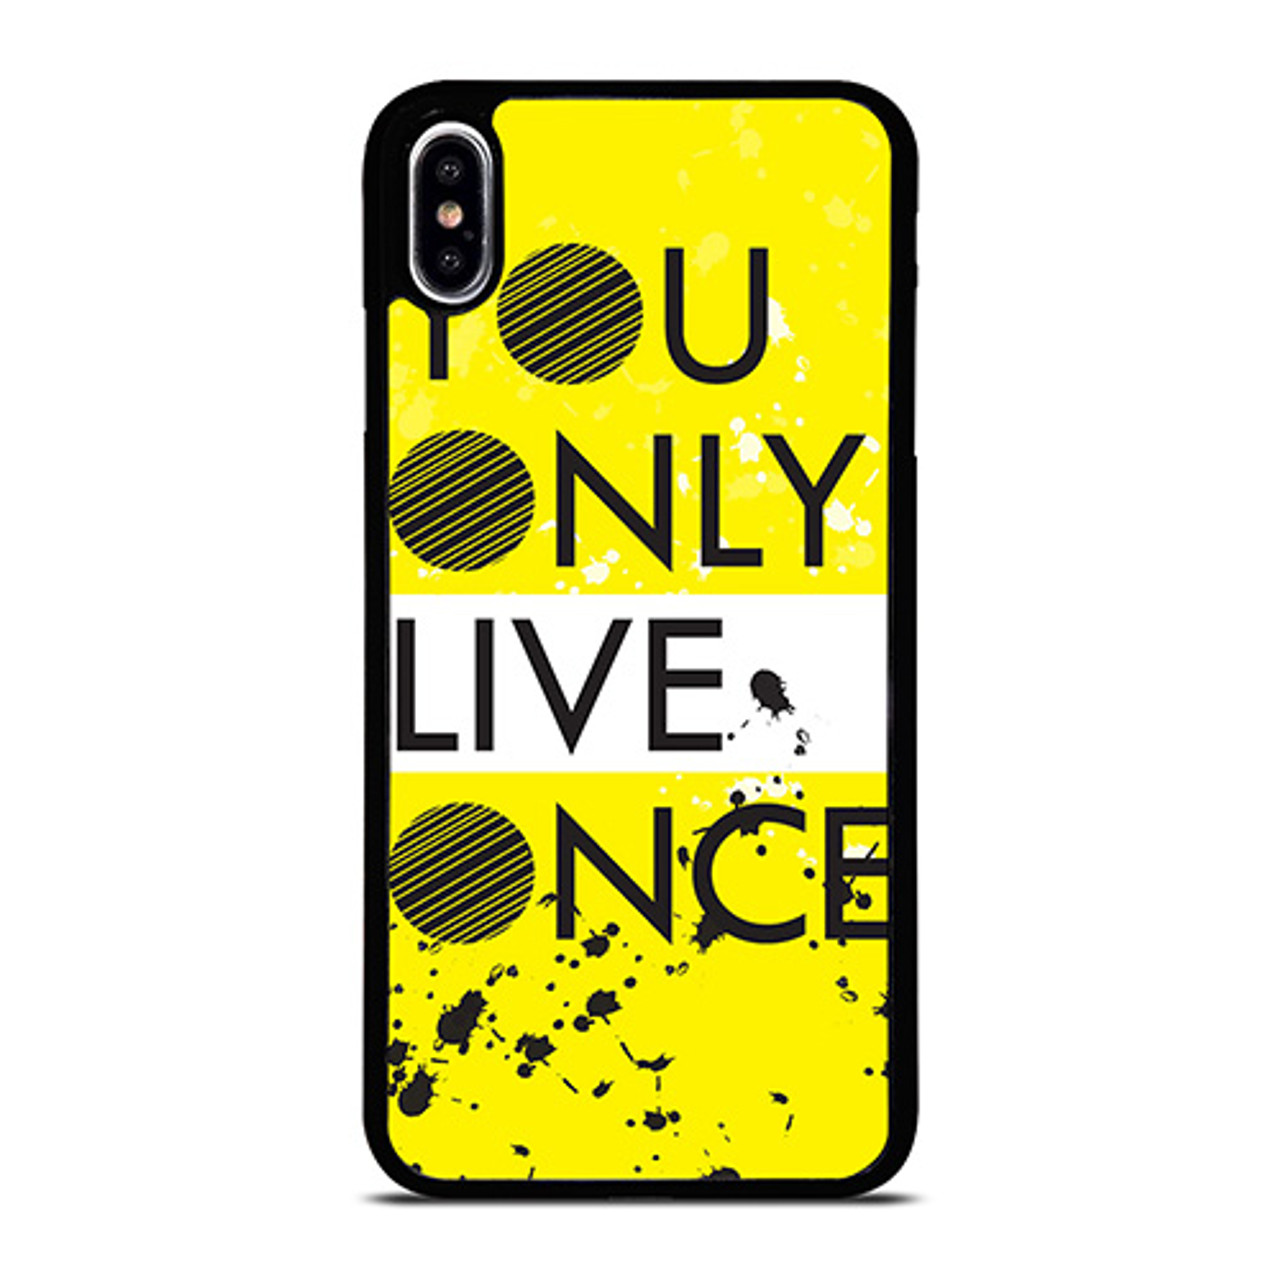 YOLO iPhone XS Max Case Cover